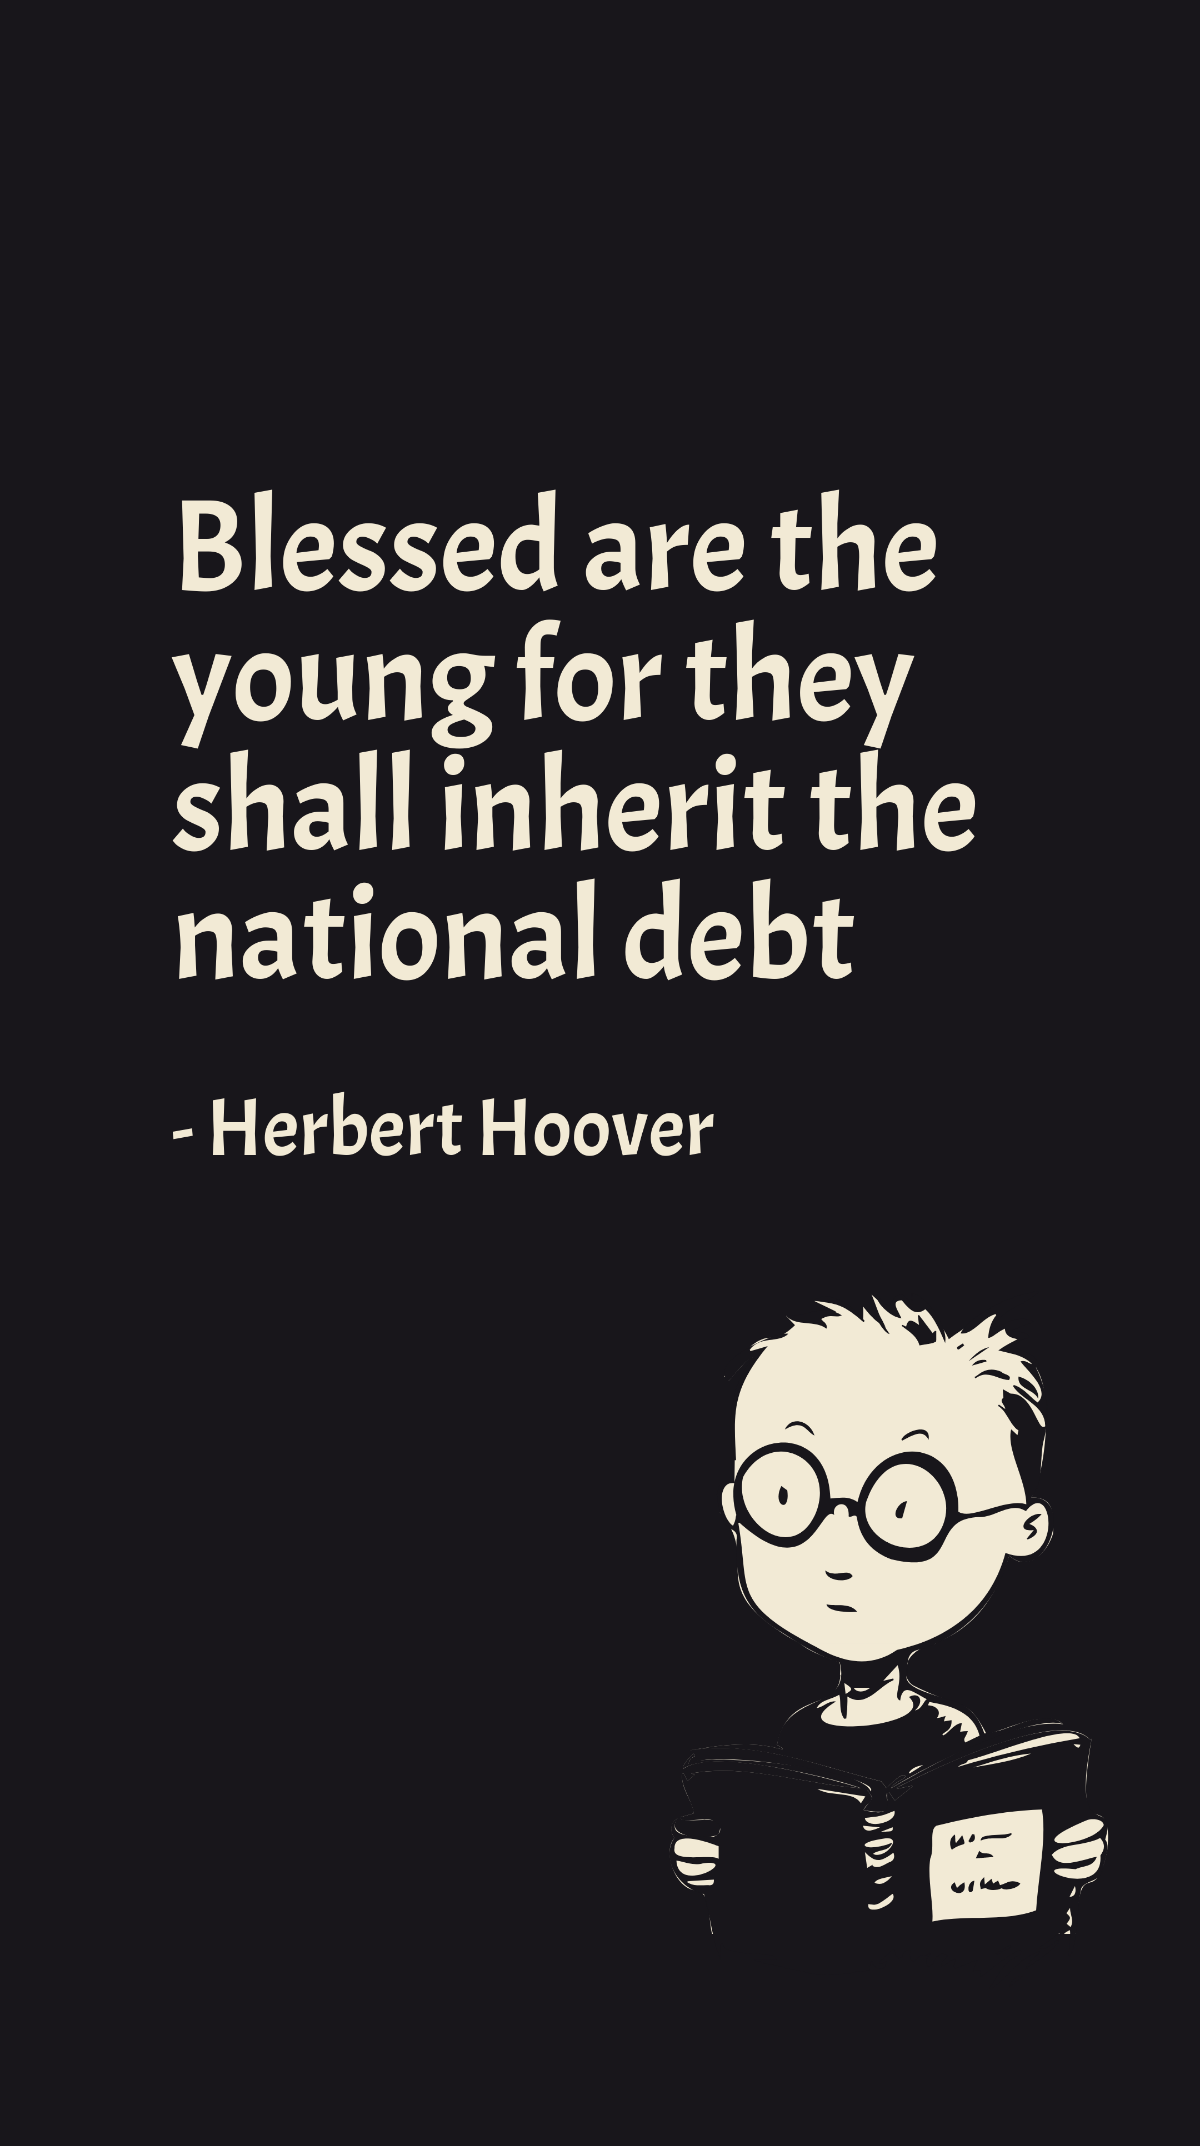 Herbert Hoover - Blessed are the young for they shall inherit the national debt Template